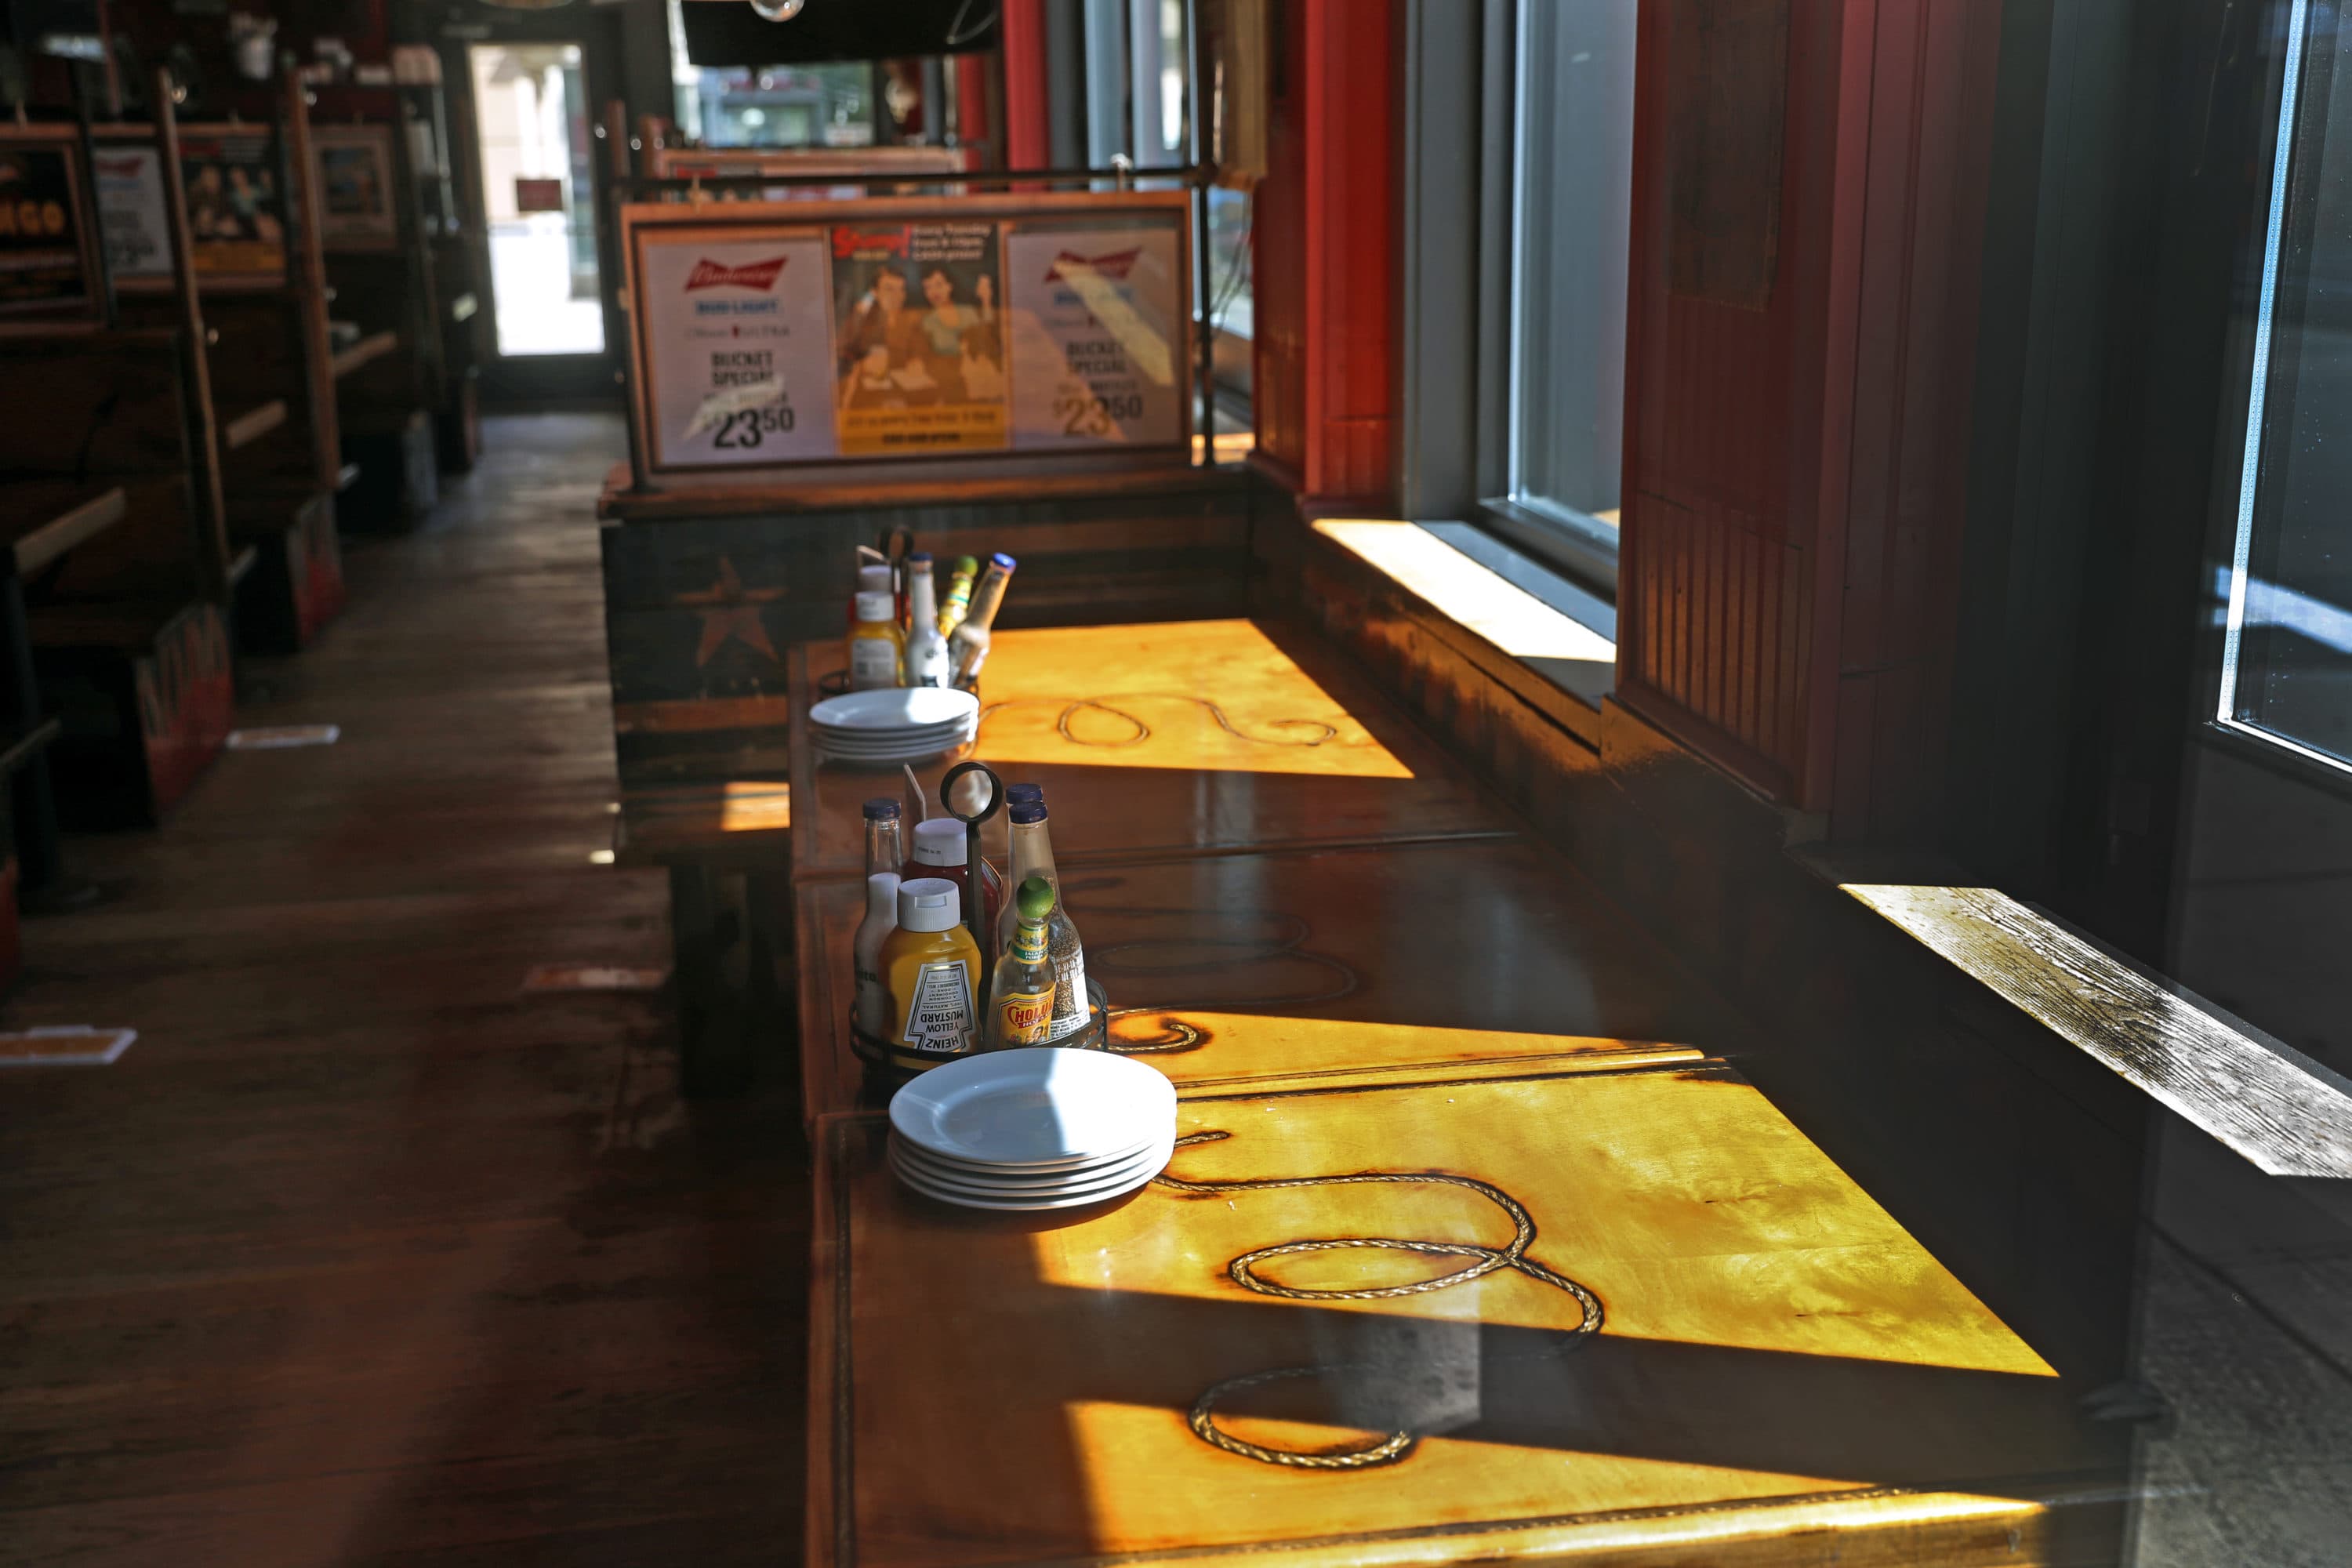 Tables set in the closed Whiskey's on Boylston St. in Boston on Sept. 8. Four restaurants right next to each other the Lir, the Pour House, the McGreevey's and Whiskey's all closed down during the COVID-19 pandemic, leaving a once-bustling part of Boylston Street empty. (David L. Ryan/The Boston Globe via Getty Images)